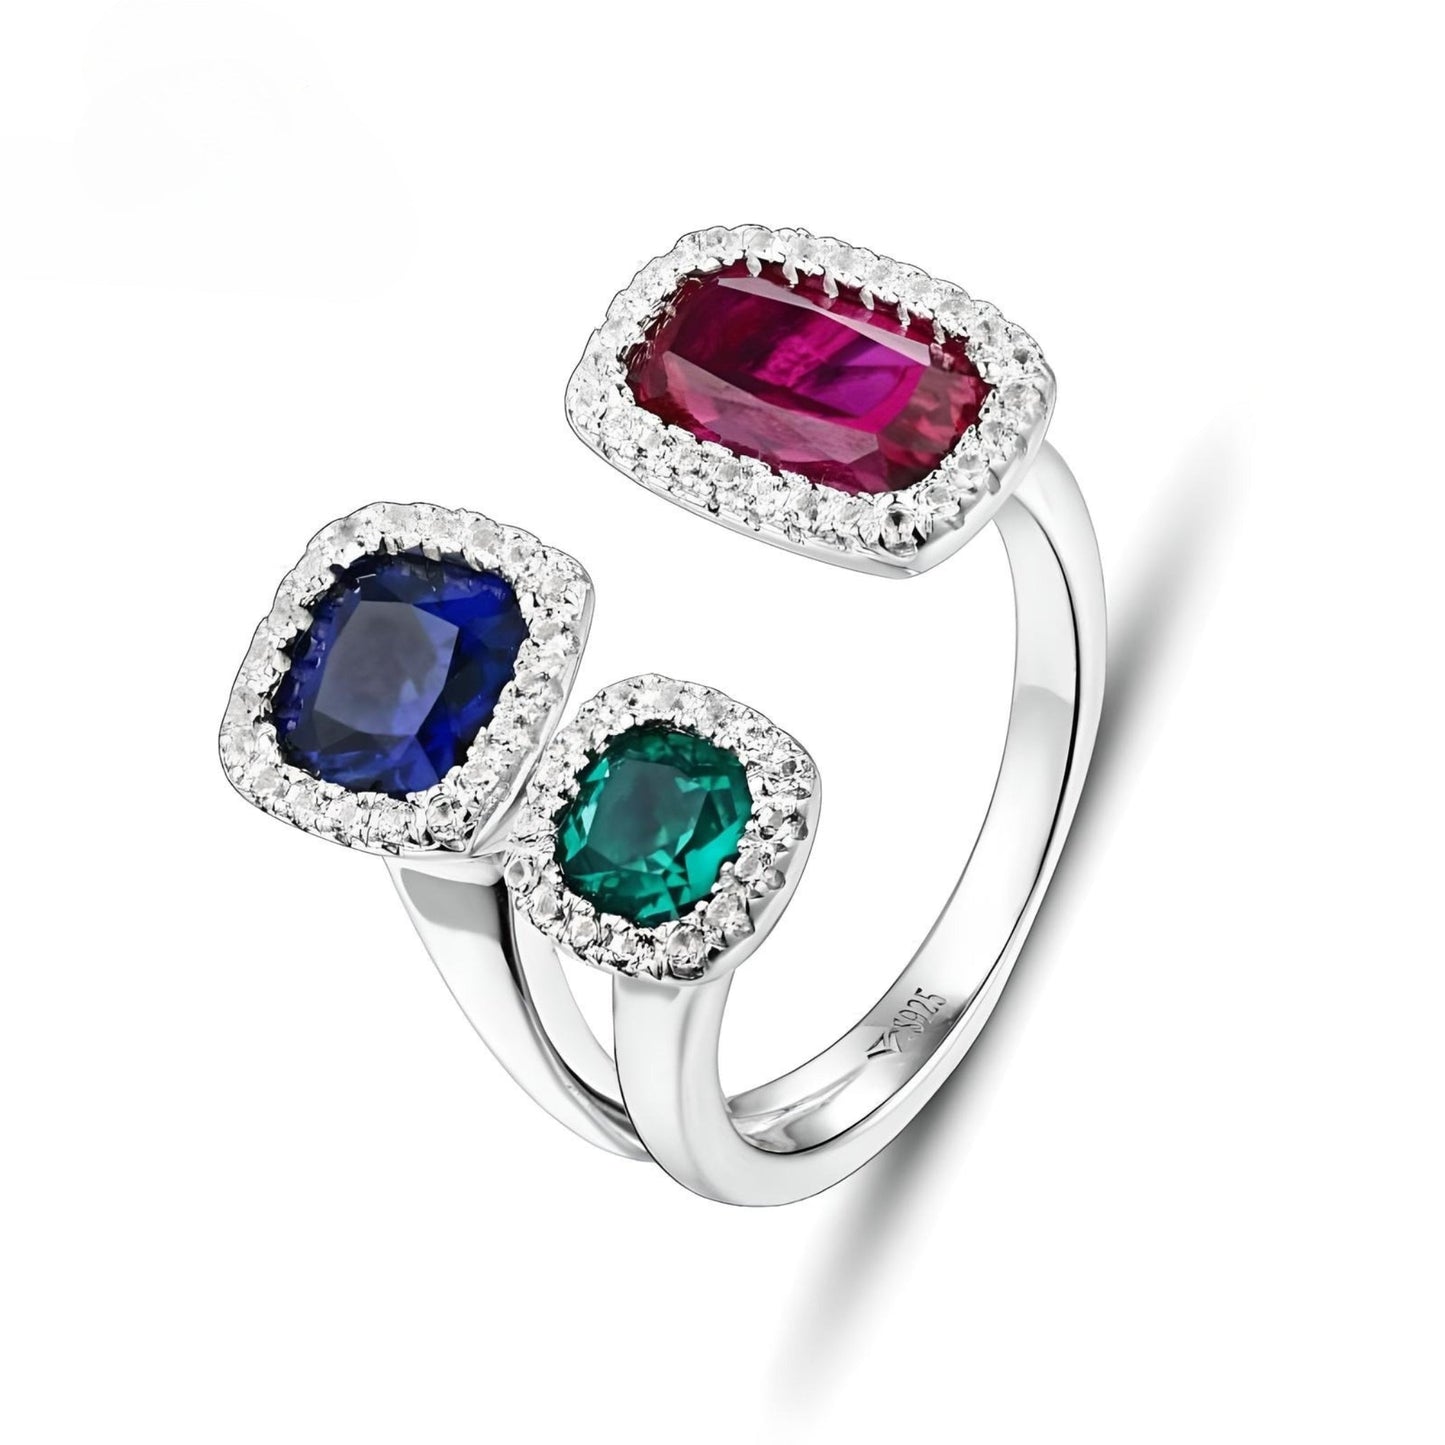 'Zultanite Sterling Silver Ring: Colour-Changing Elegance' - Gifting By Julia M